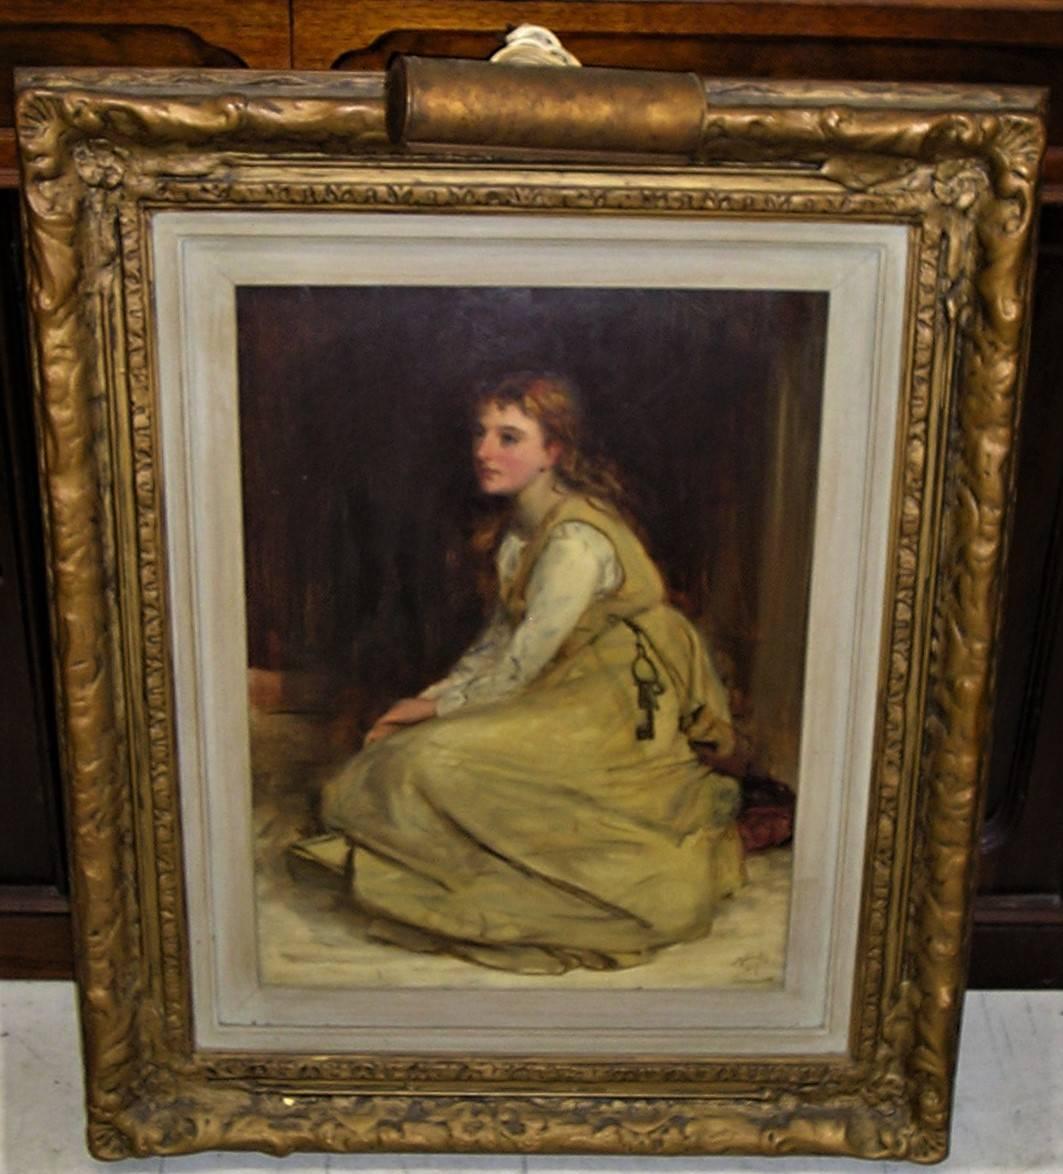 Robert Herdman (Scottish 1829-1888) oil on board.
Nicely framed by Robert Herdman depicting woman sitting with keys.
Measures: Size without frame 17.5